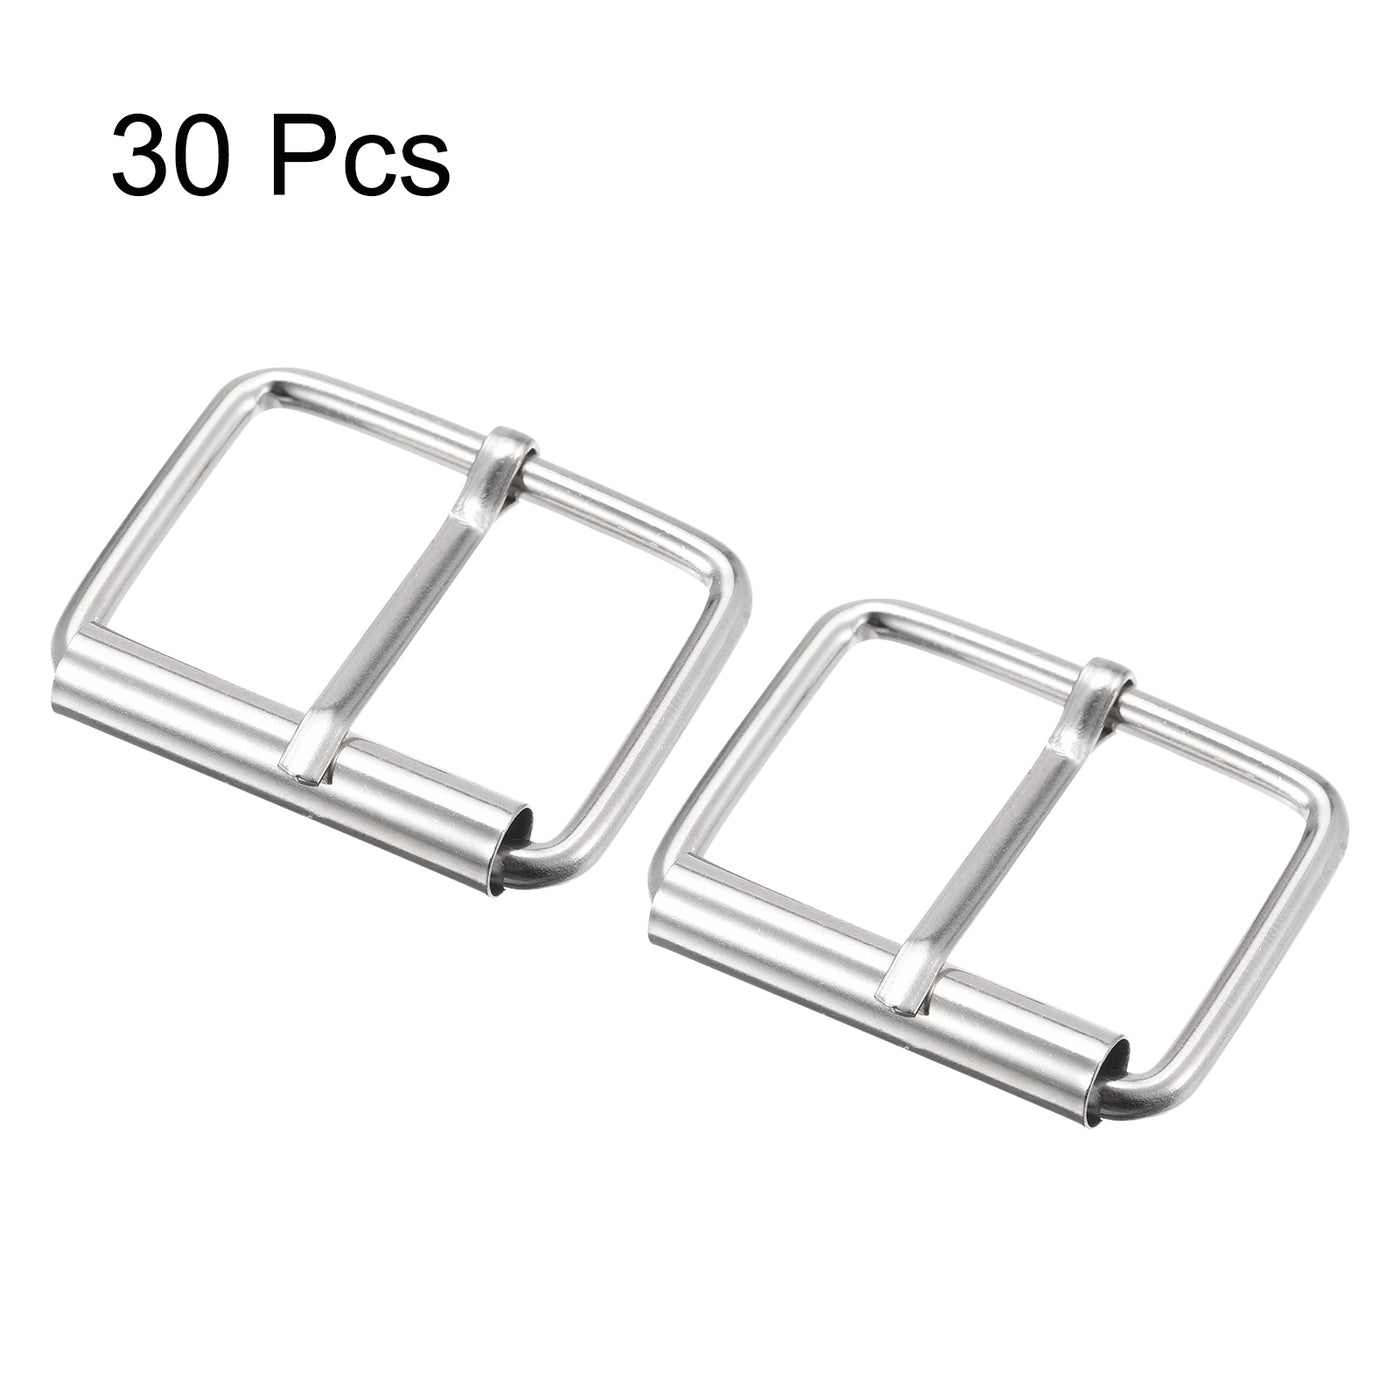 uxcell Uxcell 35mm(1.38") Metal Roller Buckles for Belts Bags Straps DIY Silver Tone 30pcs